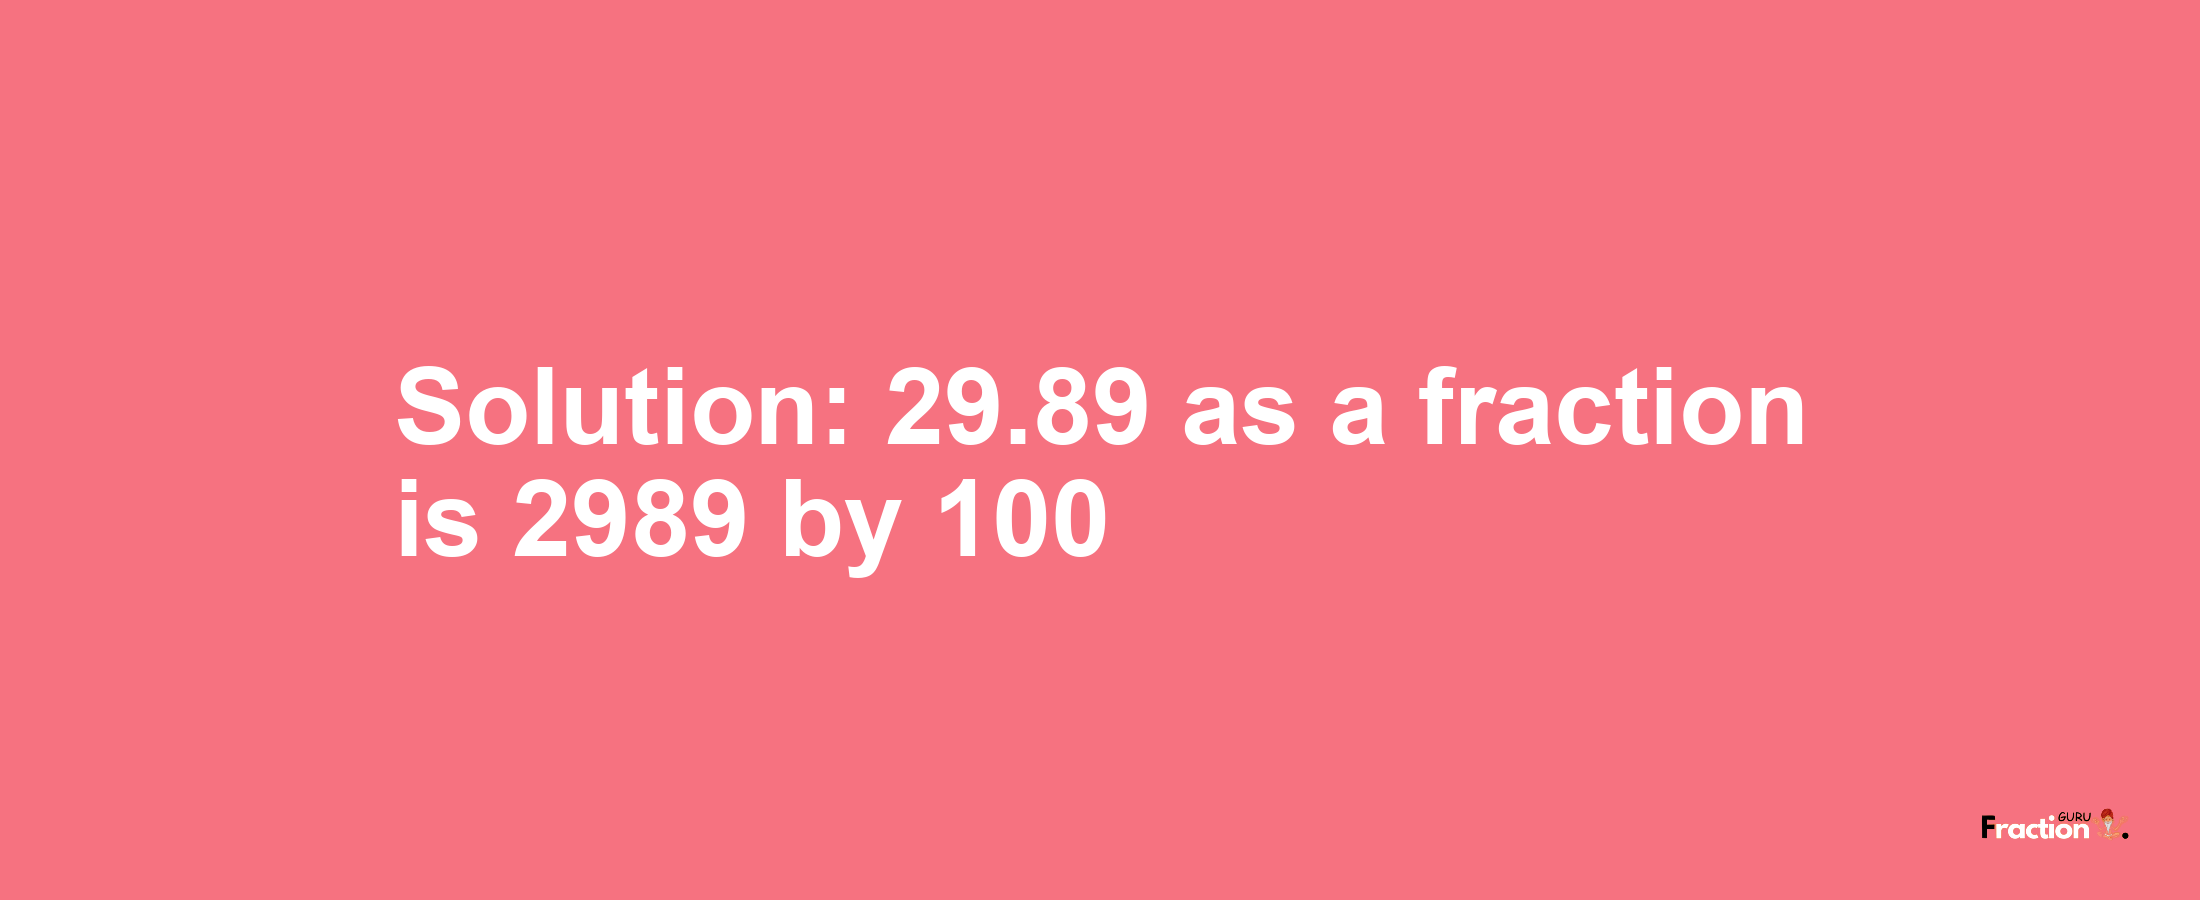 Solution:29.89 as a fraction is 2989/100